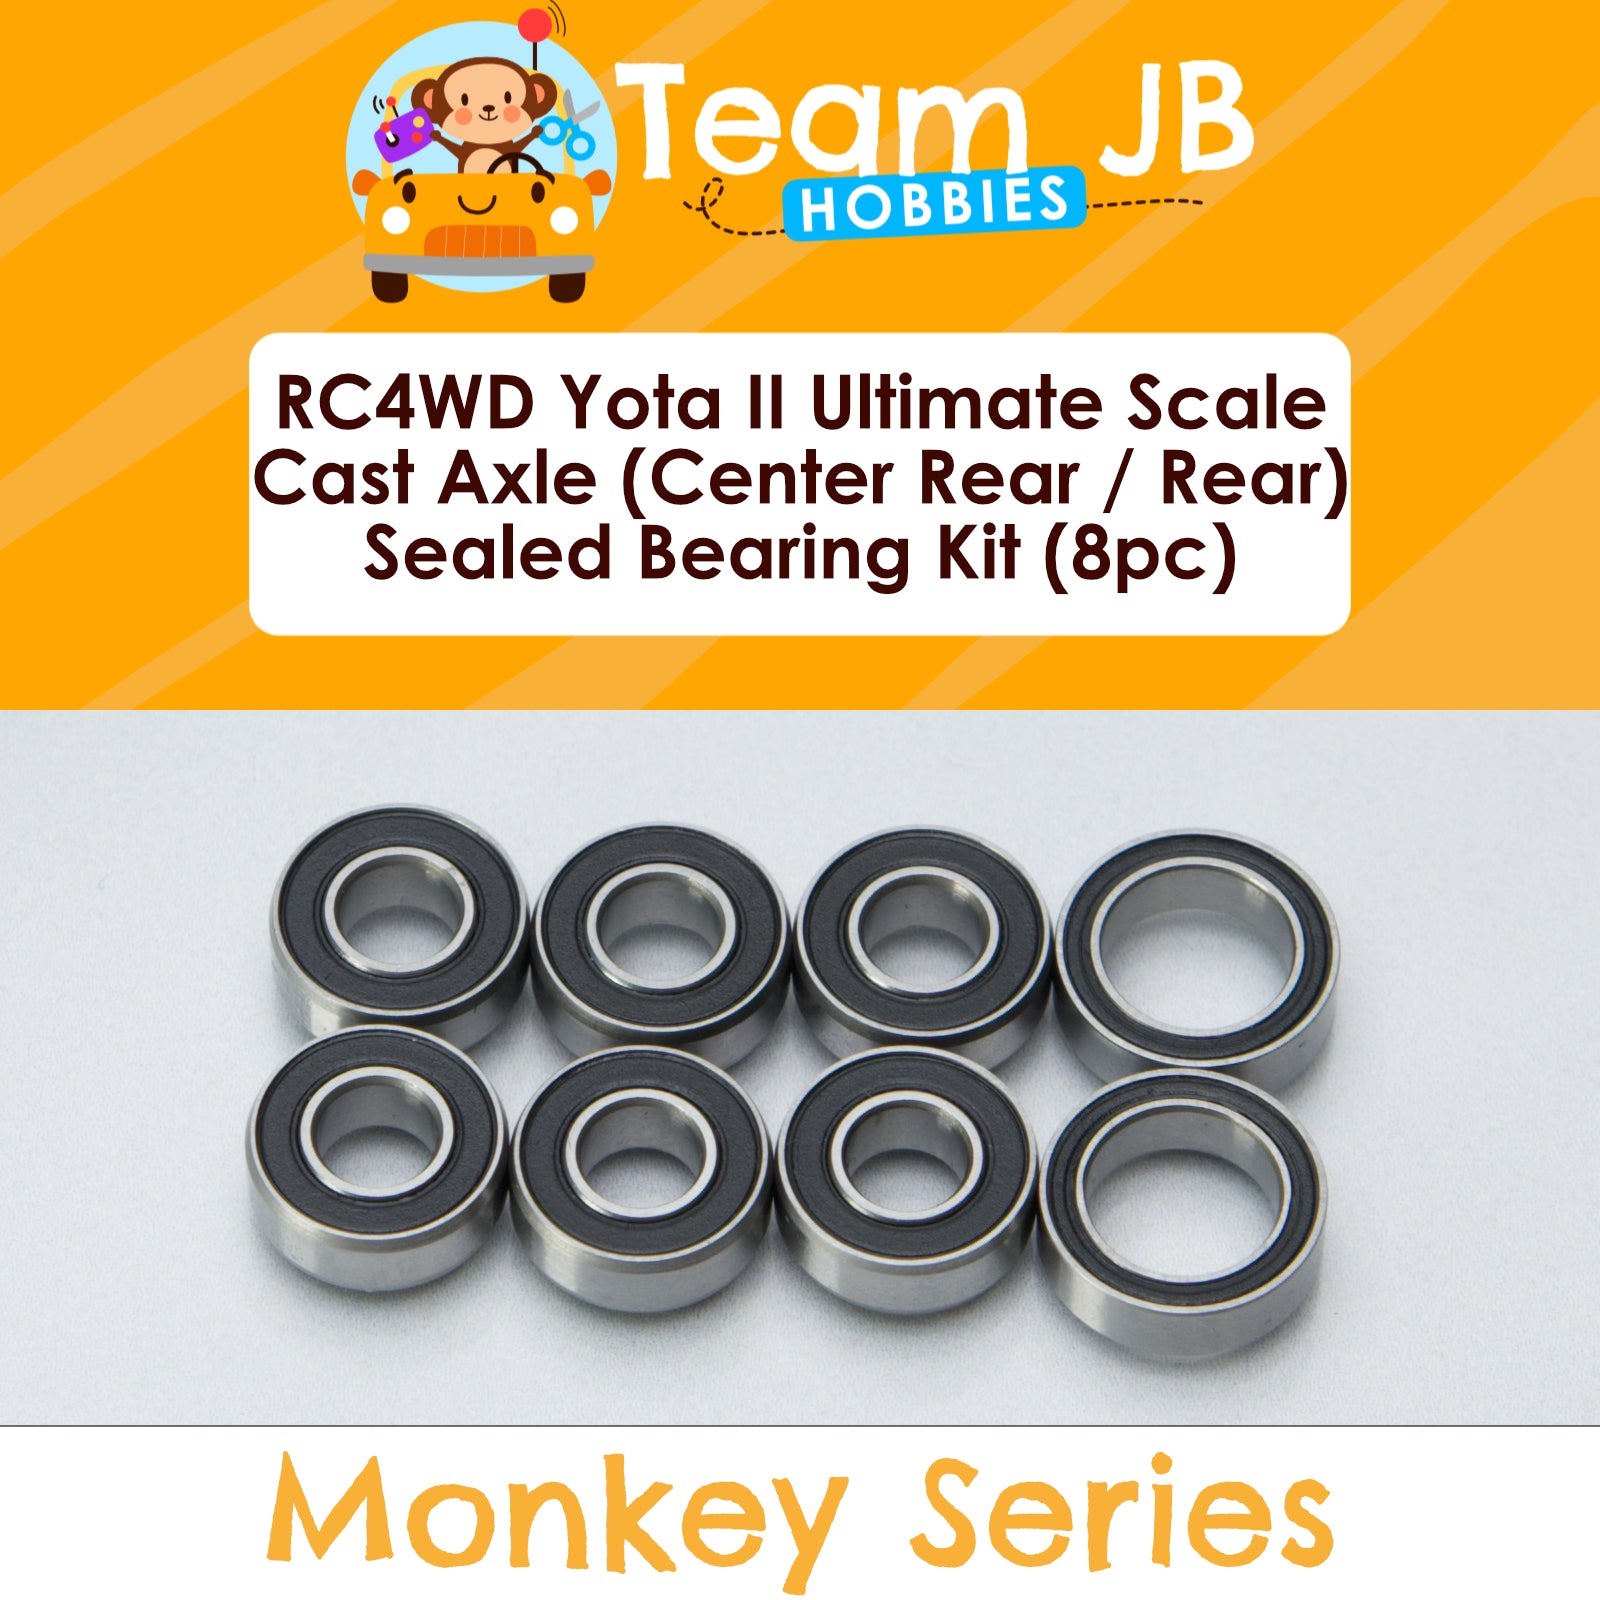 RC4WD Yota II Ultimate Scale Cast Axle (Center Rear / Rear) - Sealed Bearing Kit